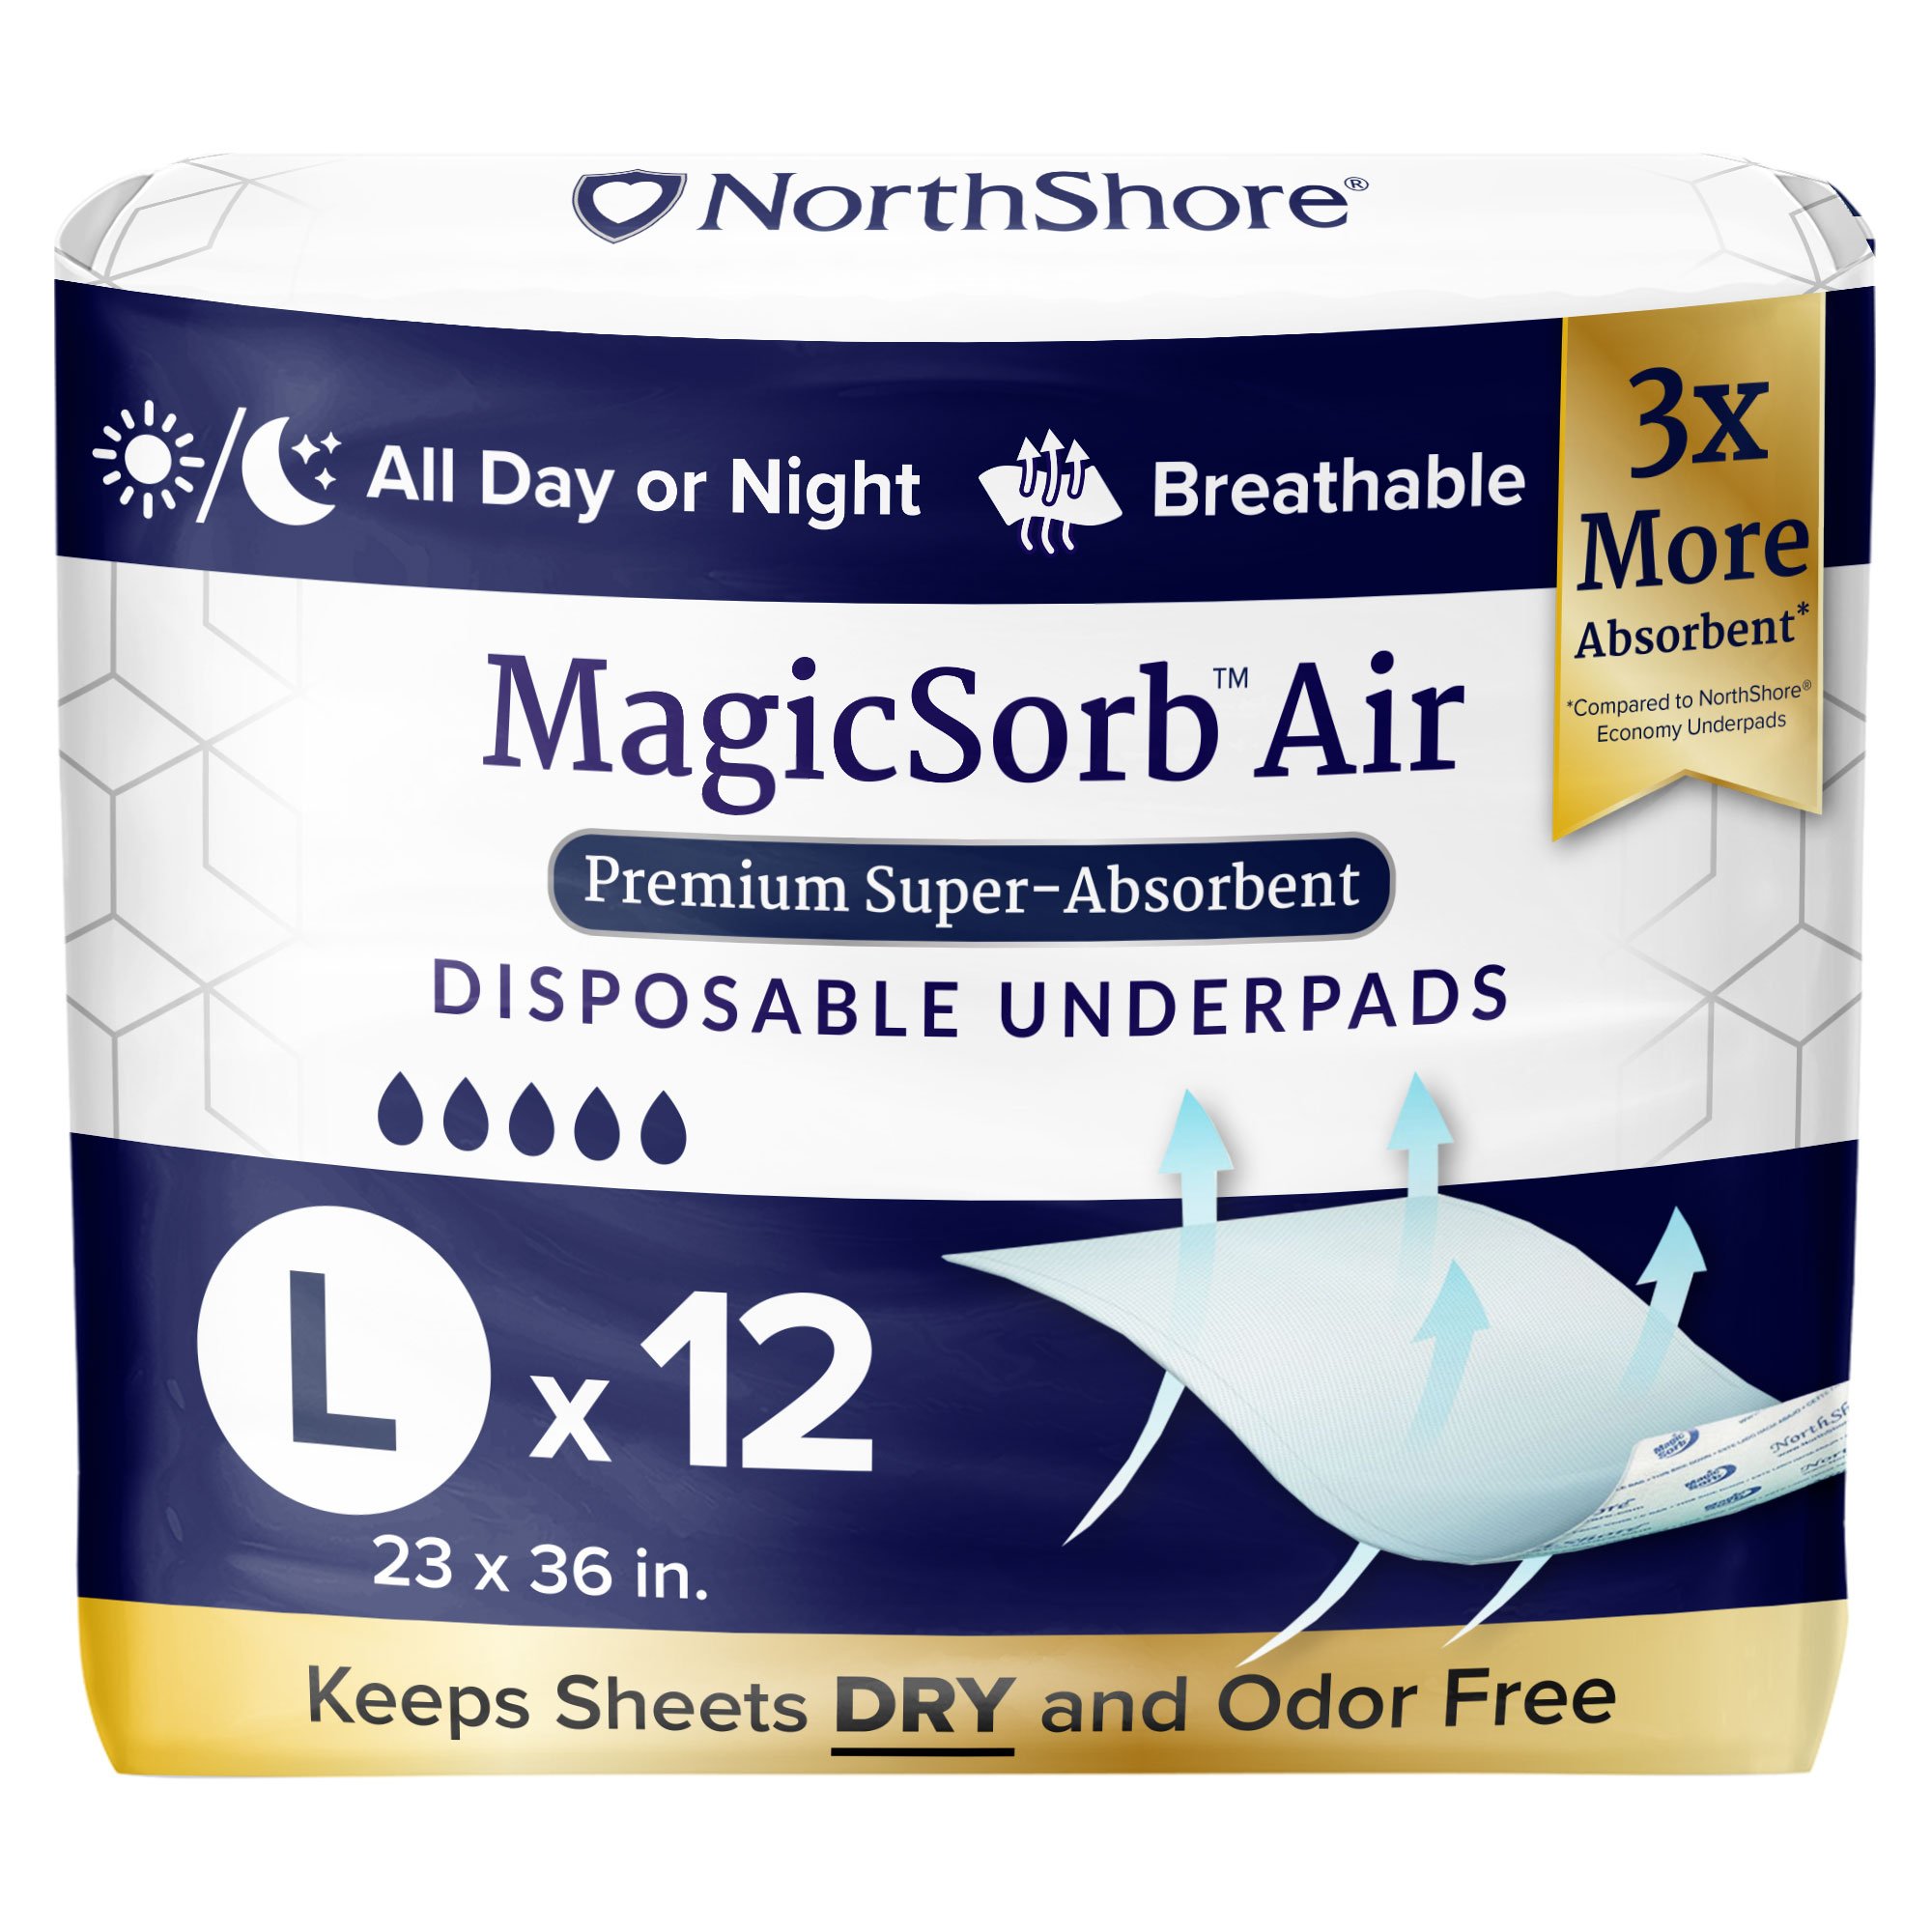 NorthShore MagicSorb Air Super-Absorbent Disposable Underpads, 23x36 in., Large, Pack/12